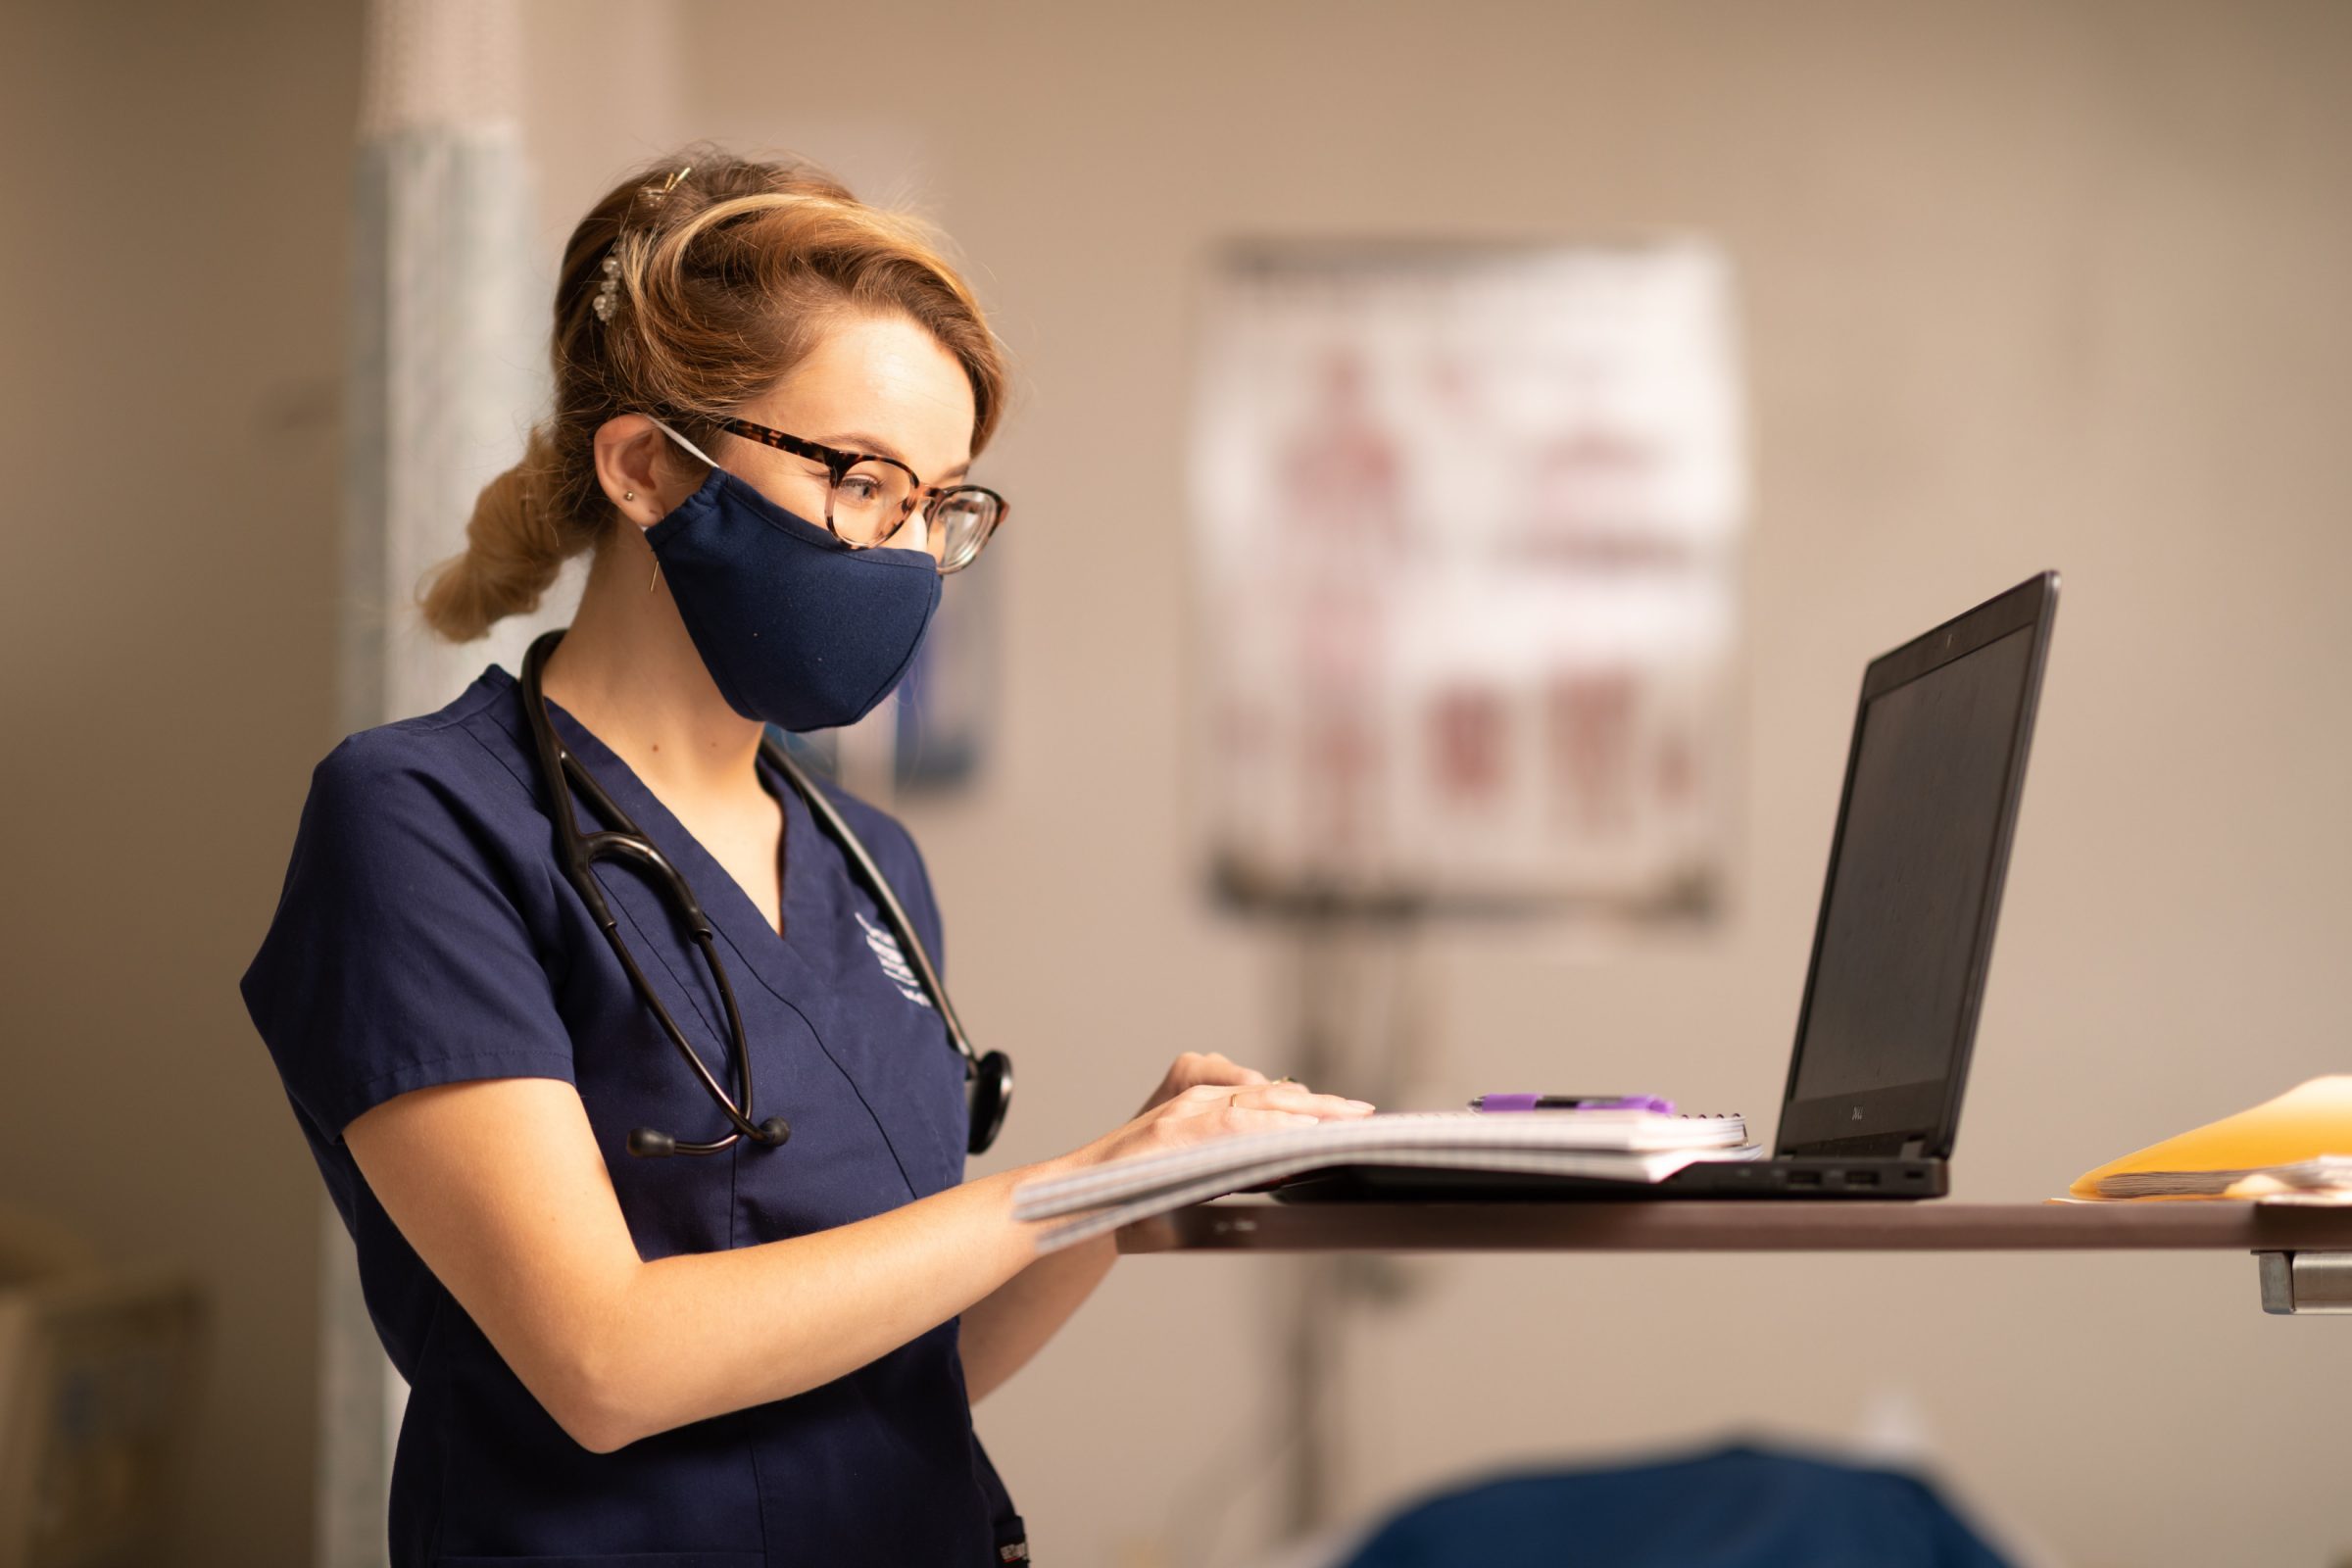 Nursing student wearing scrubs and a stethoscope takes notes on a laptop.